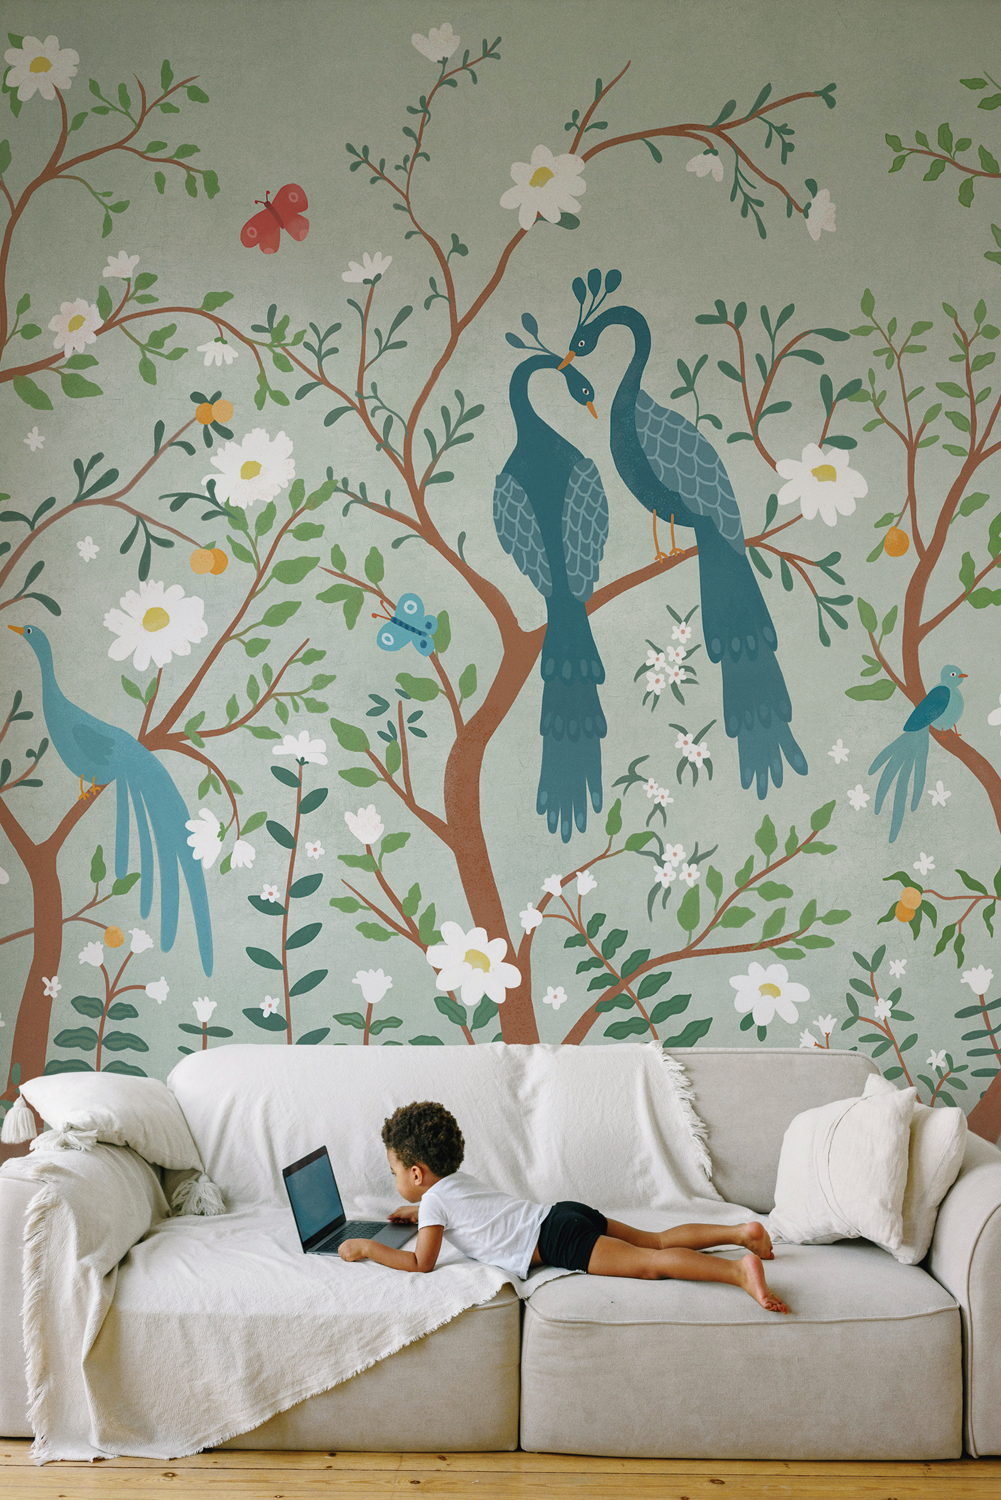 Rifle Paper Co Turned Its Beloved Peacock Wallpaper into a LargeScale  Mural